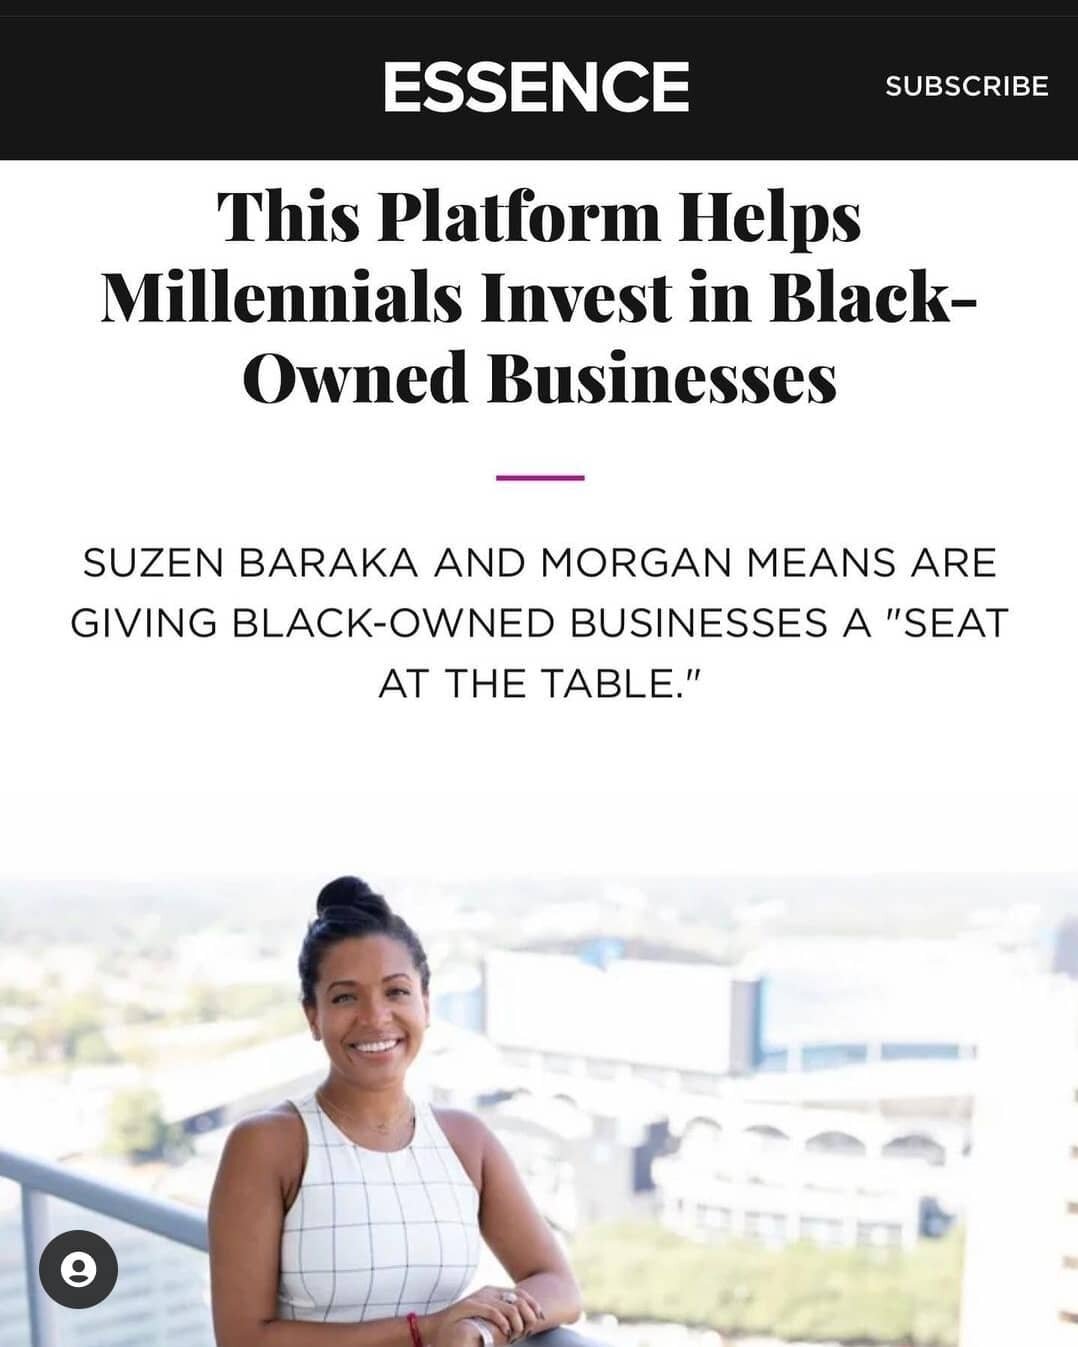 Black women represent 42% of new women-owned businesses&mdash;three times their share of the female population&mdash;and&nbsp;36% of all Black-owned&nbsp;employer businesses. And yet we are the least likely to receive adequate capital funding, if any